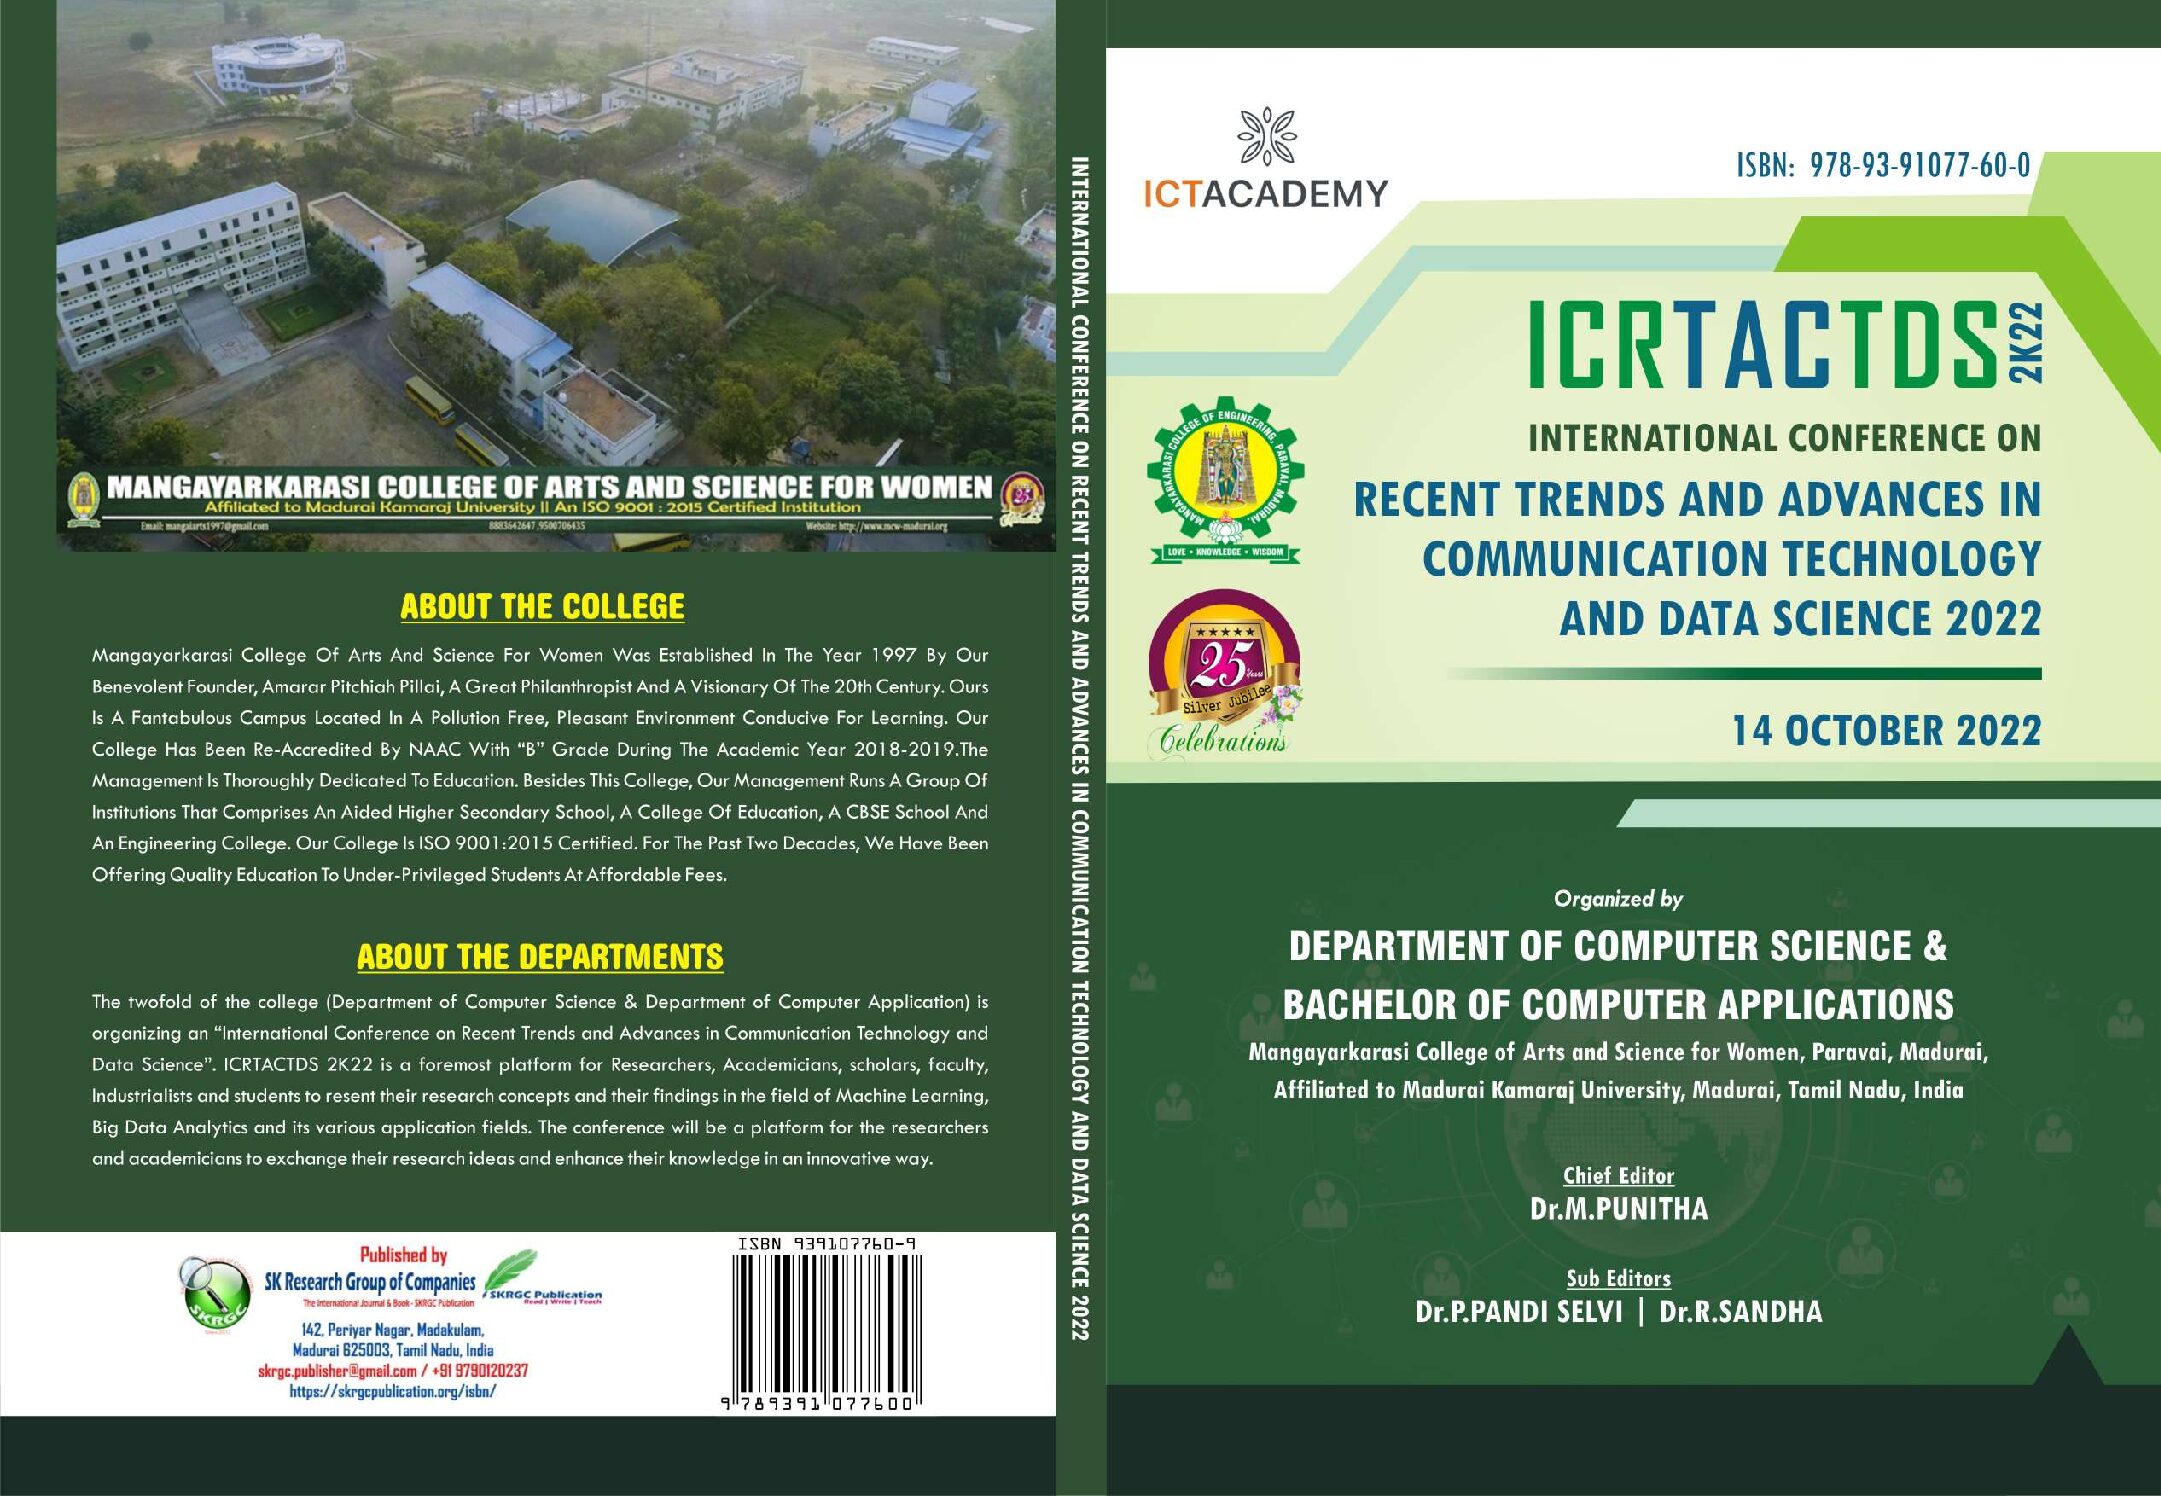 International Conference on Recent Trends and Advances in Communication Technology and Data Science 2022, ICRTACTDS – 2K22